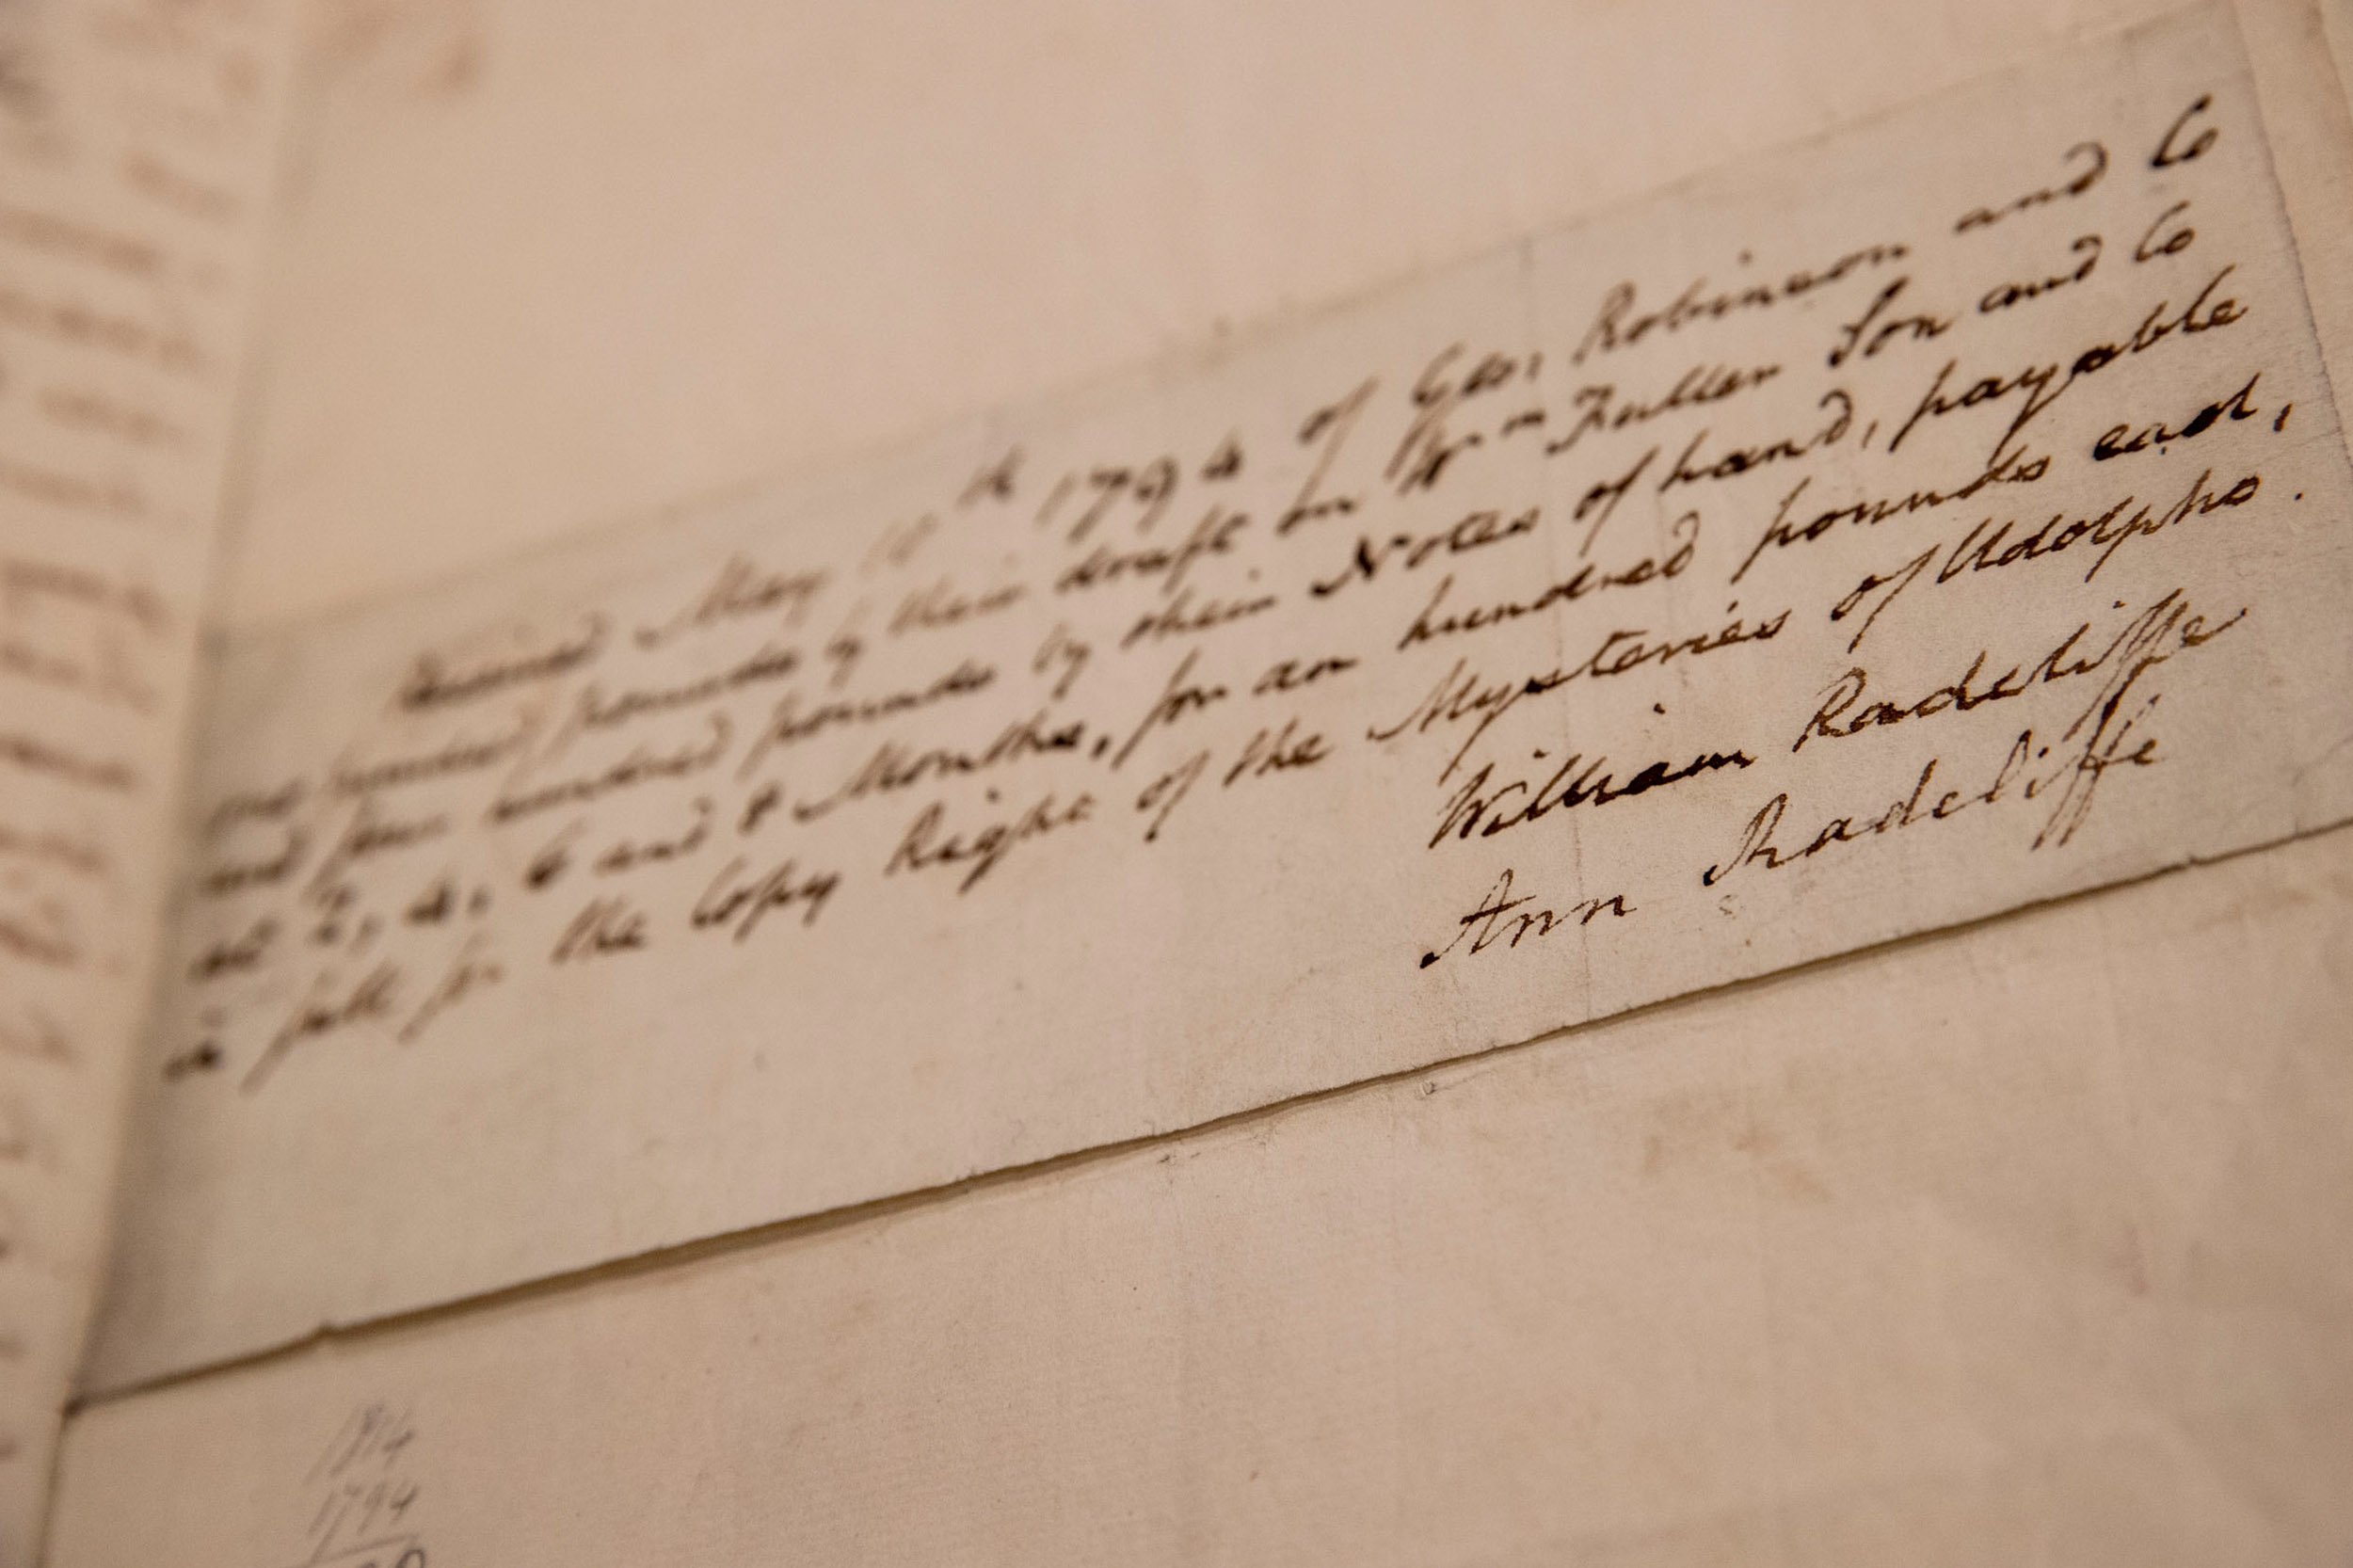 Ann Radcliffe and her husband William Radcliffe’s signatures on a contract